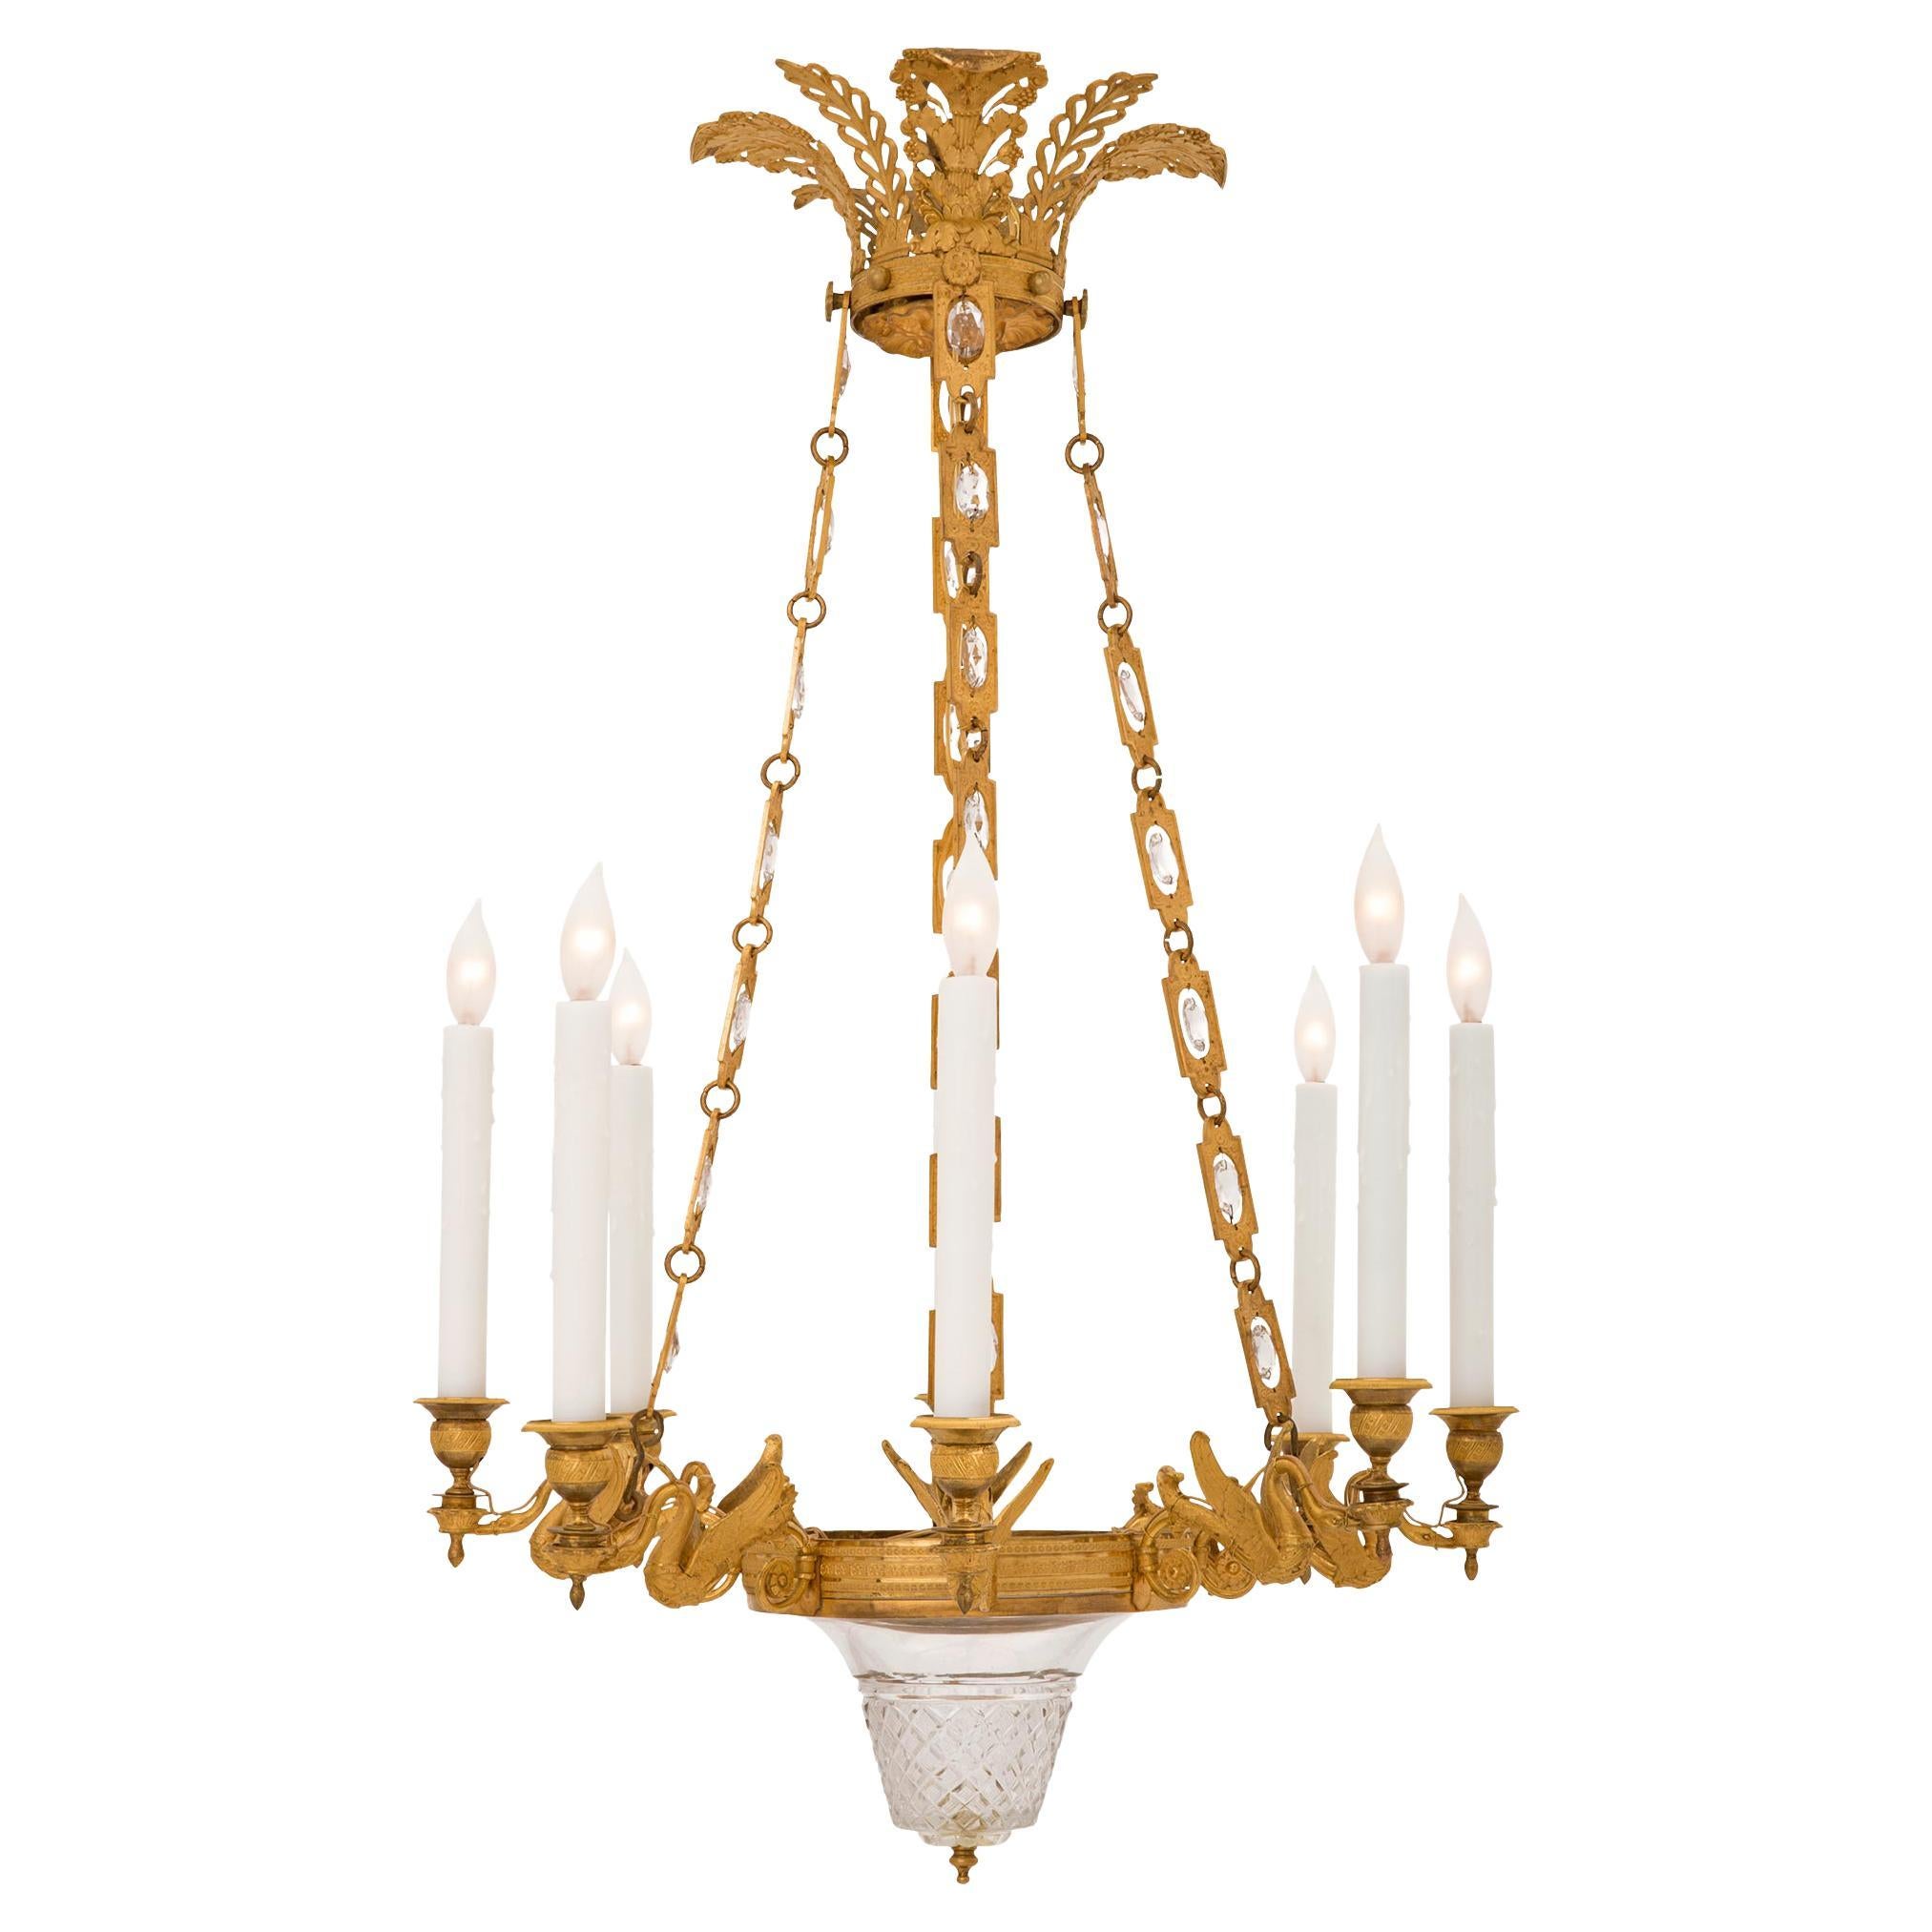 French Early 19th Century Empire Style Ormolu and Baccarat Crystal Chandelier